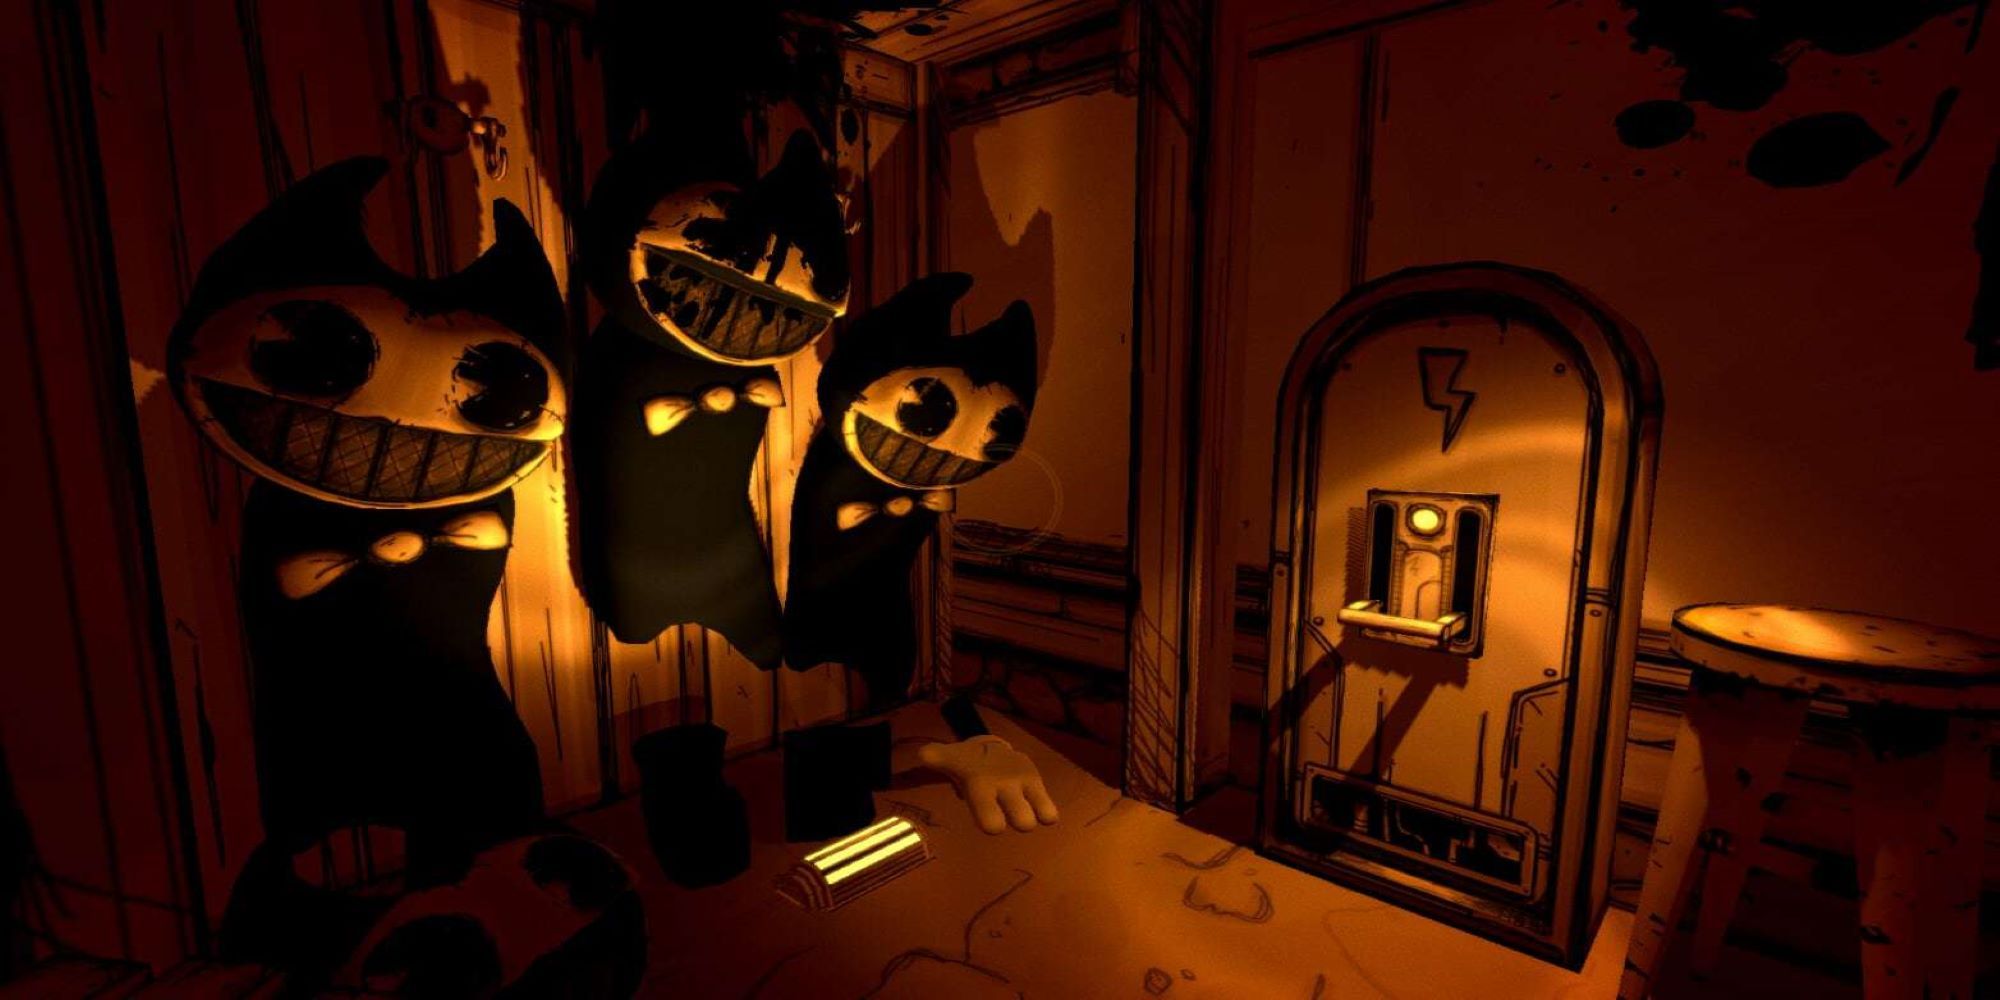 Bendy from Bendy and The Dark Revival